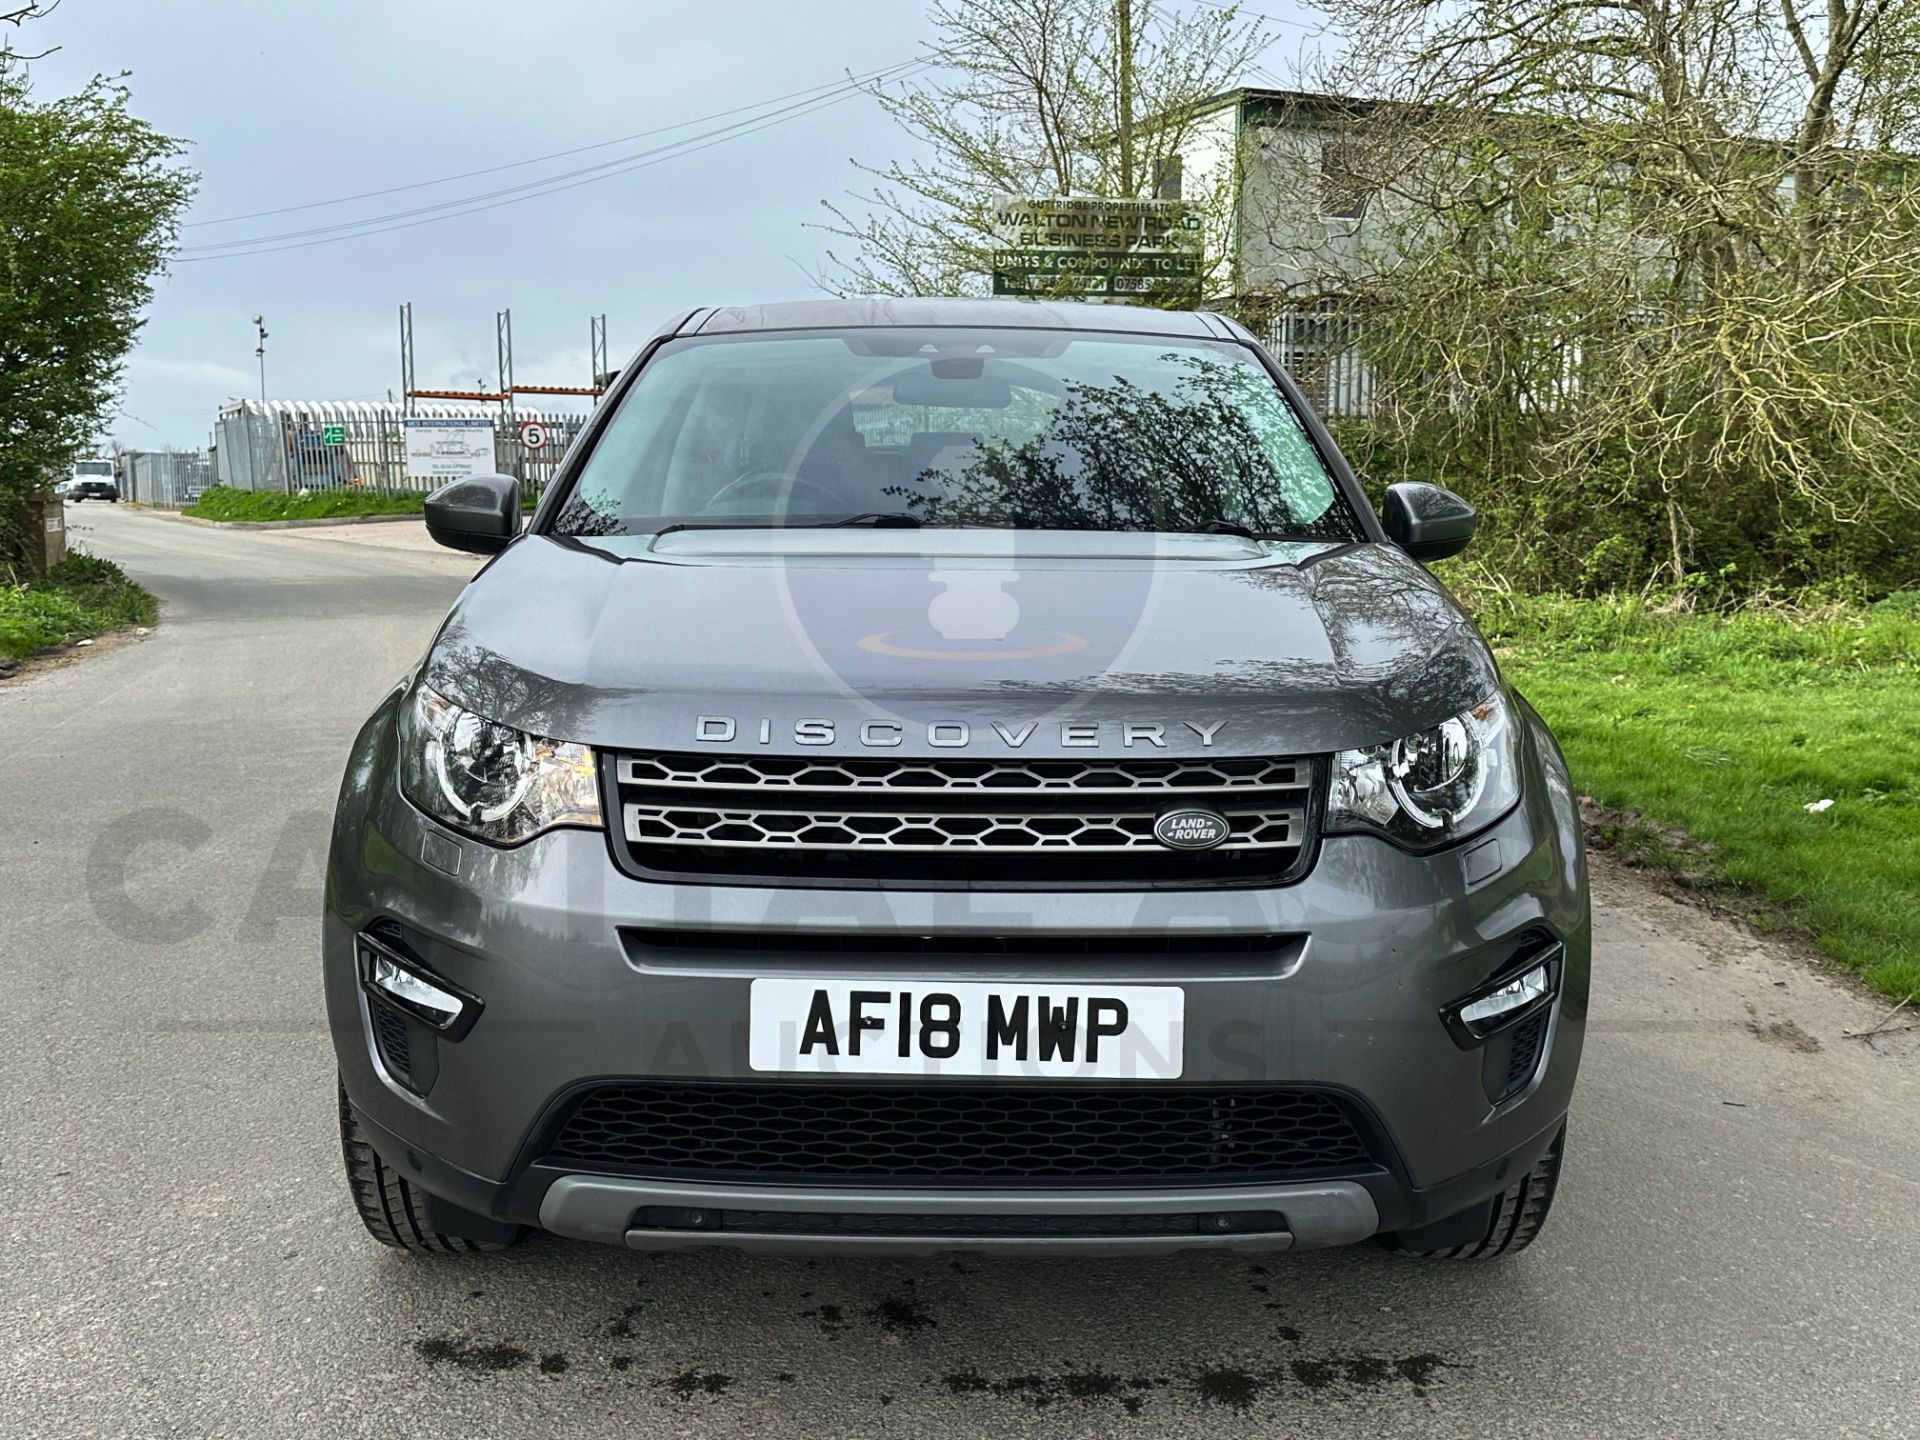 (On Sale) LAND ROVER DISCOVERY SPORT *SE TECH* 5 DOOR SUV (2018 - EURO 6) 2.0 TD4 - AUTO *HUGE SPEC* - Image 4 of 51